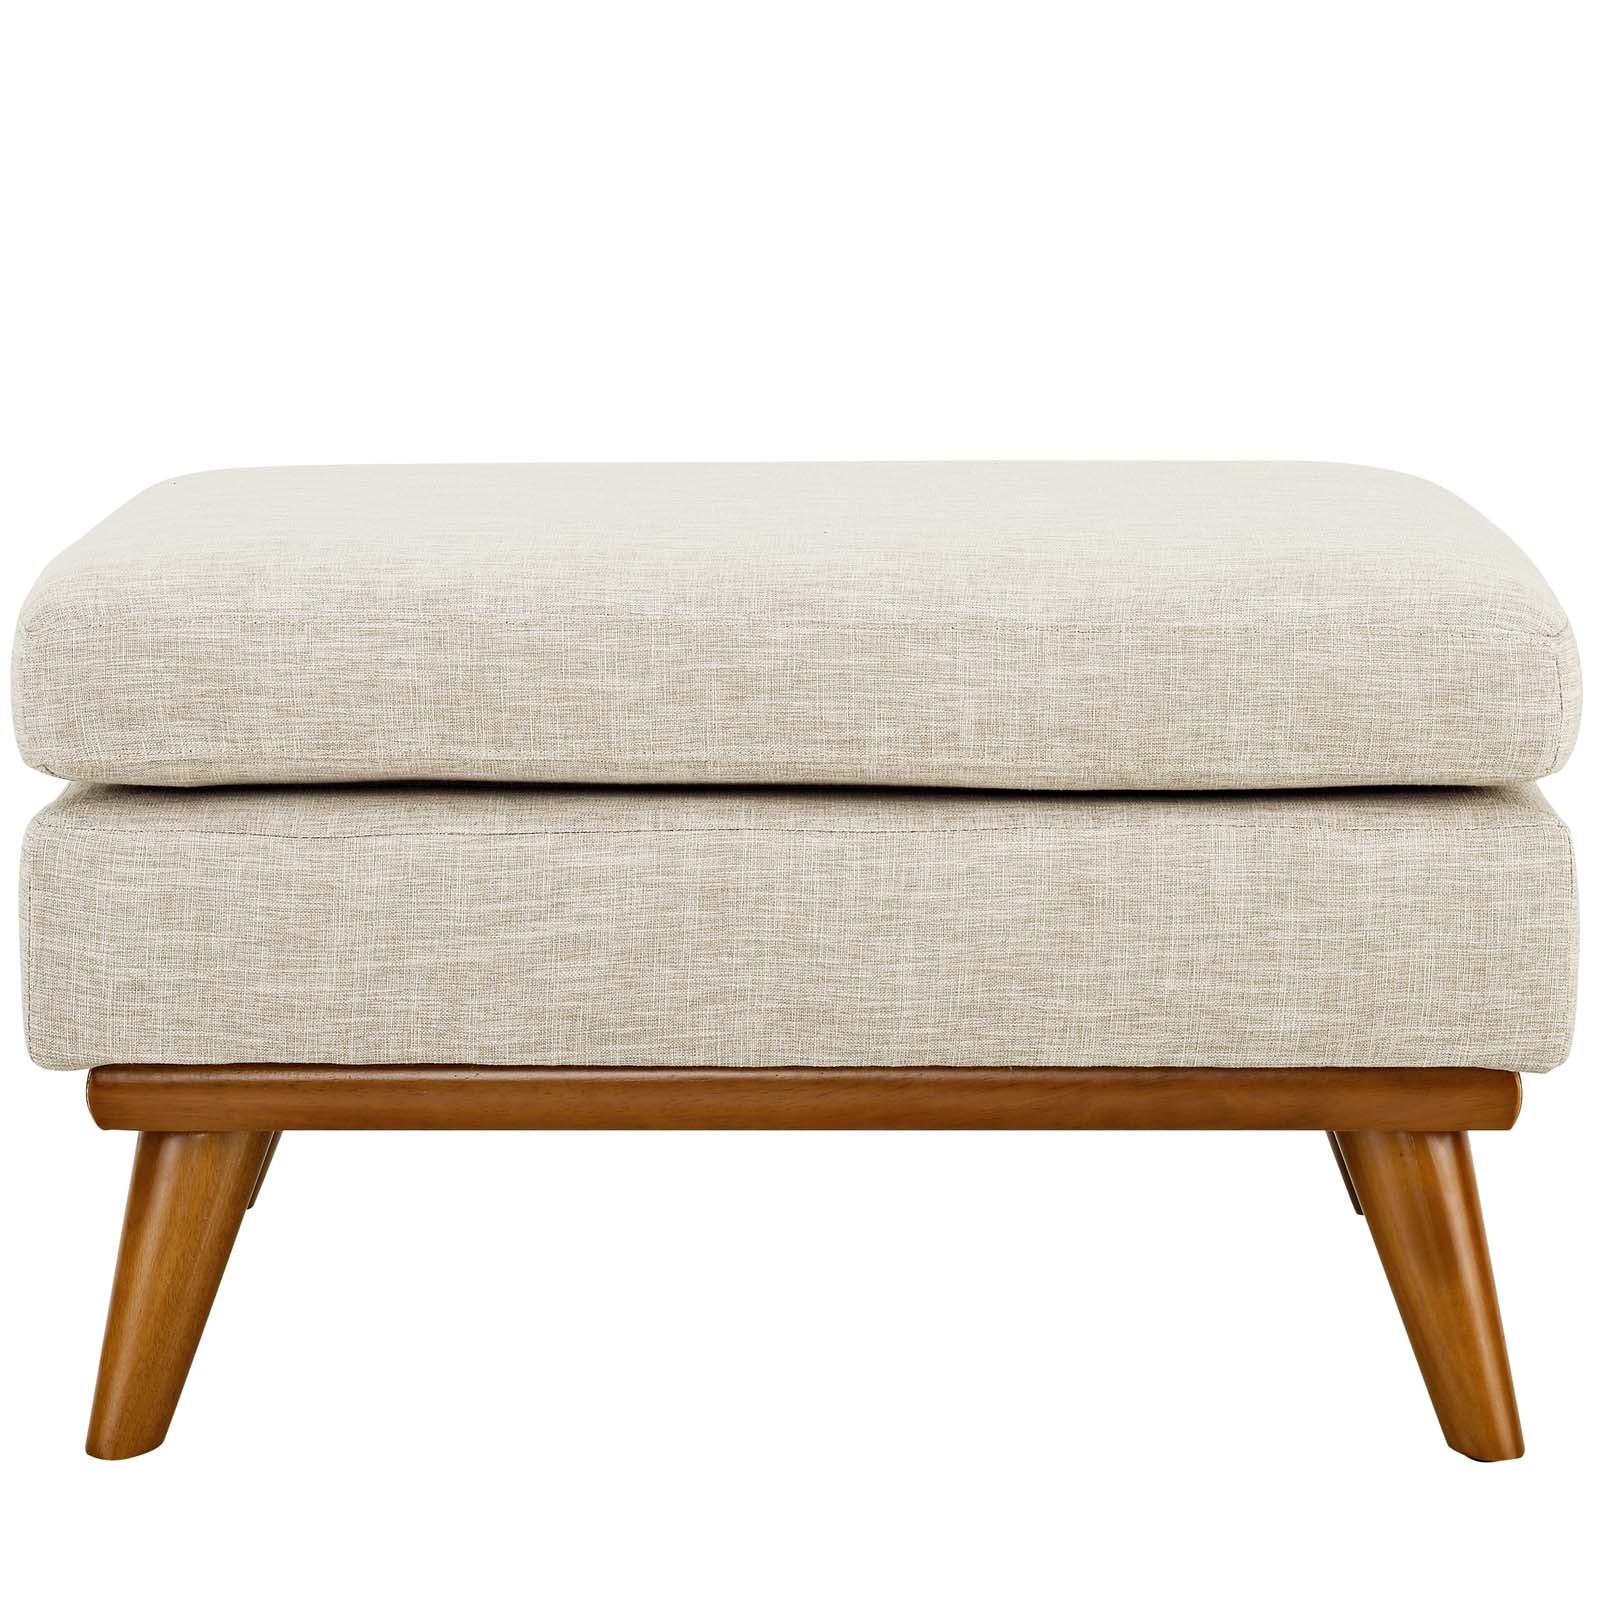 Engage Upholstered Fabric Ottoman - East Shore Modern Home Furnishings